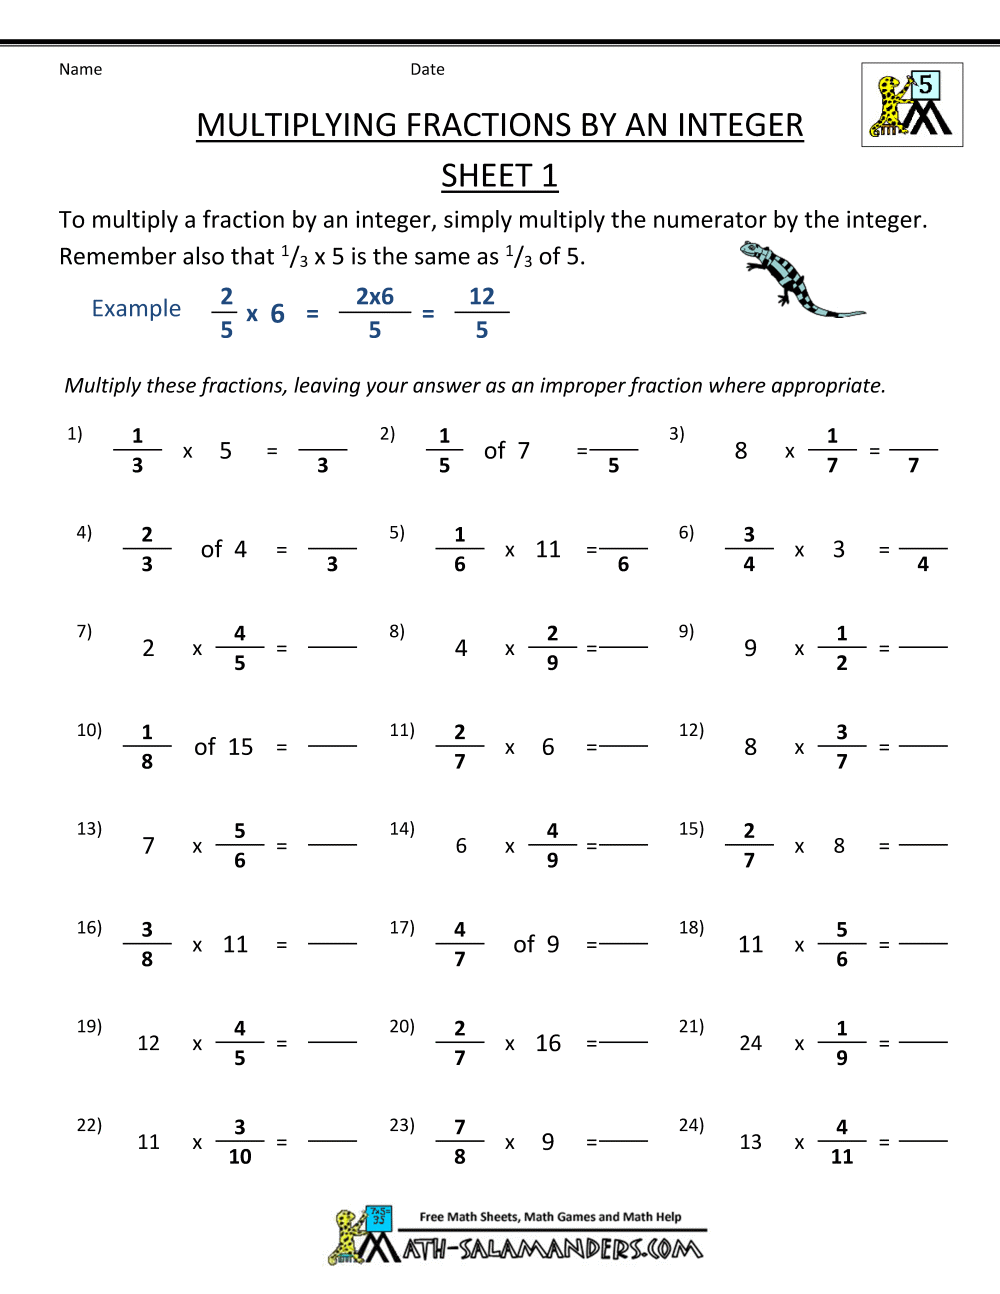 operations-with-integers-worksheet-pin-by-janet-pranger-on-math-math-fact-worksheets-integers